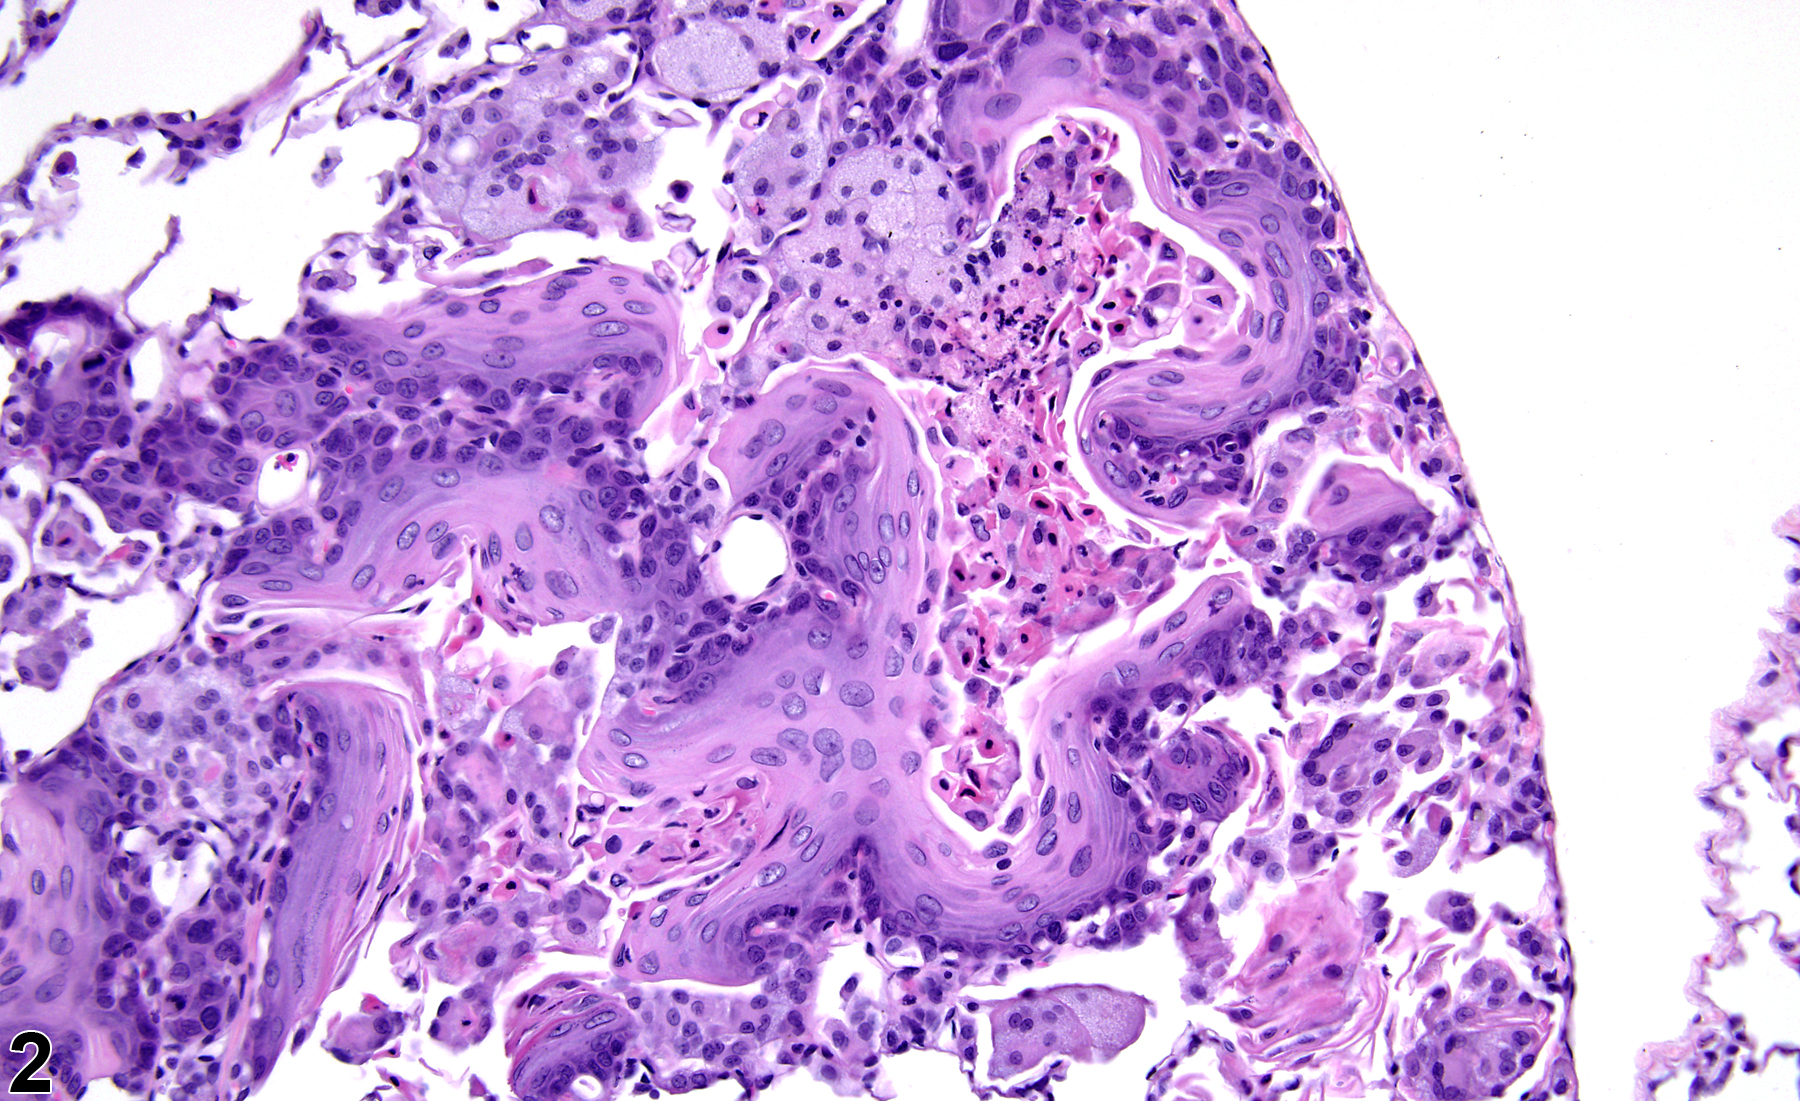 Image of alveolar squamous metaplasia in the lung from a female Harlan Sprague-Dawley rat in a subchronic study